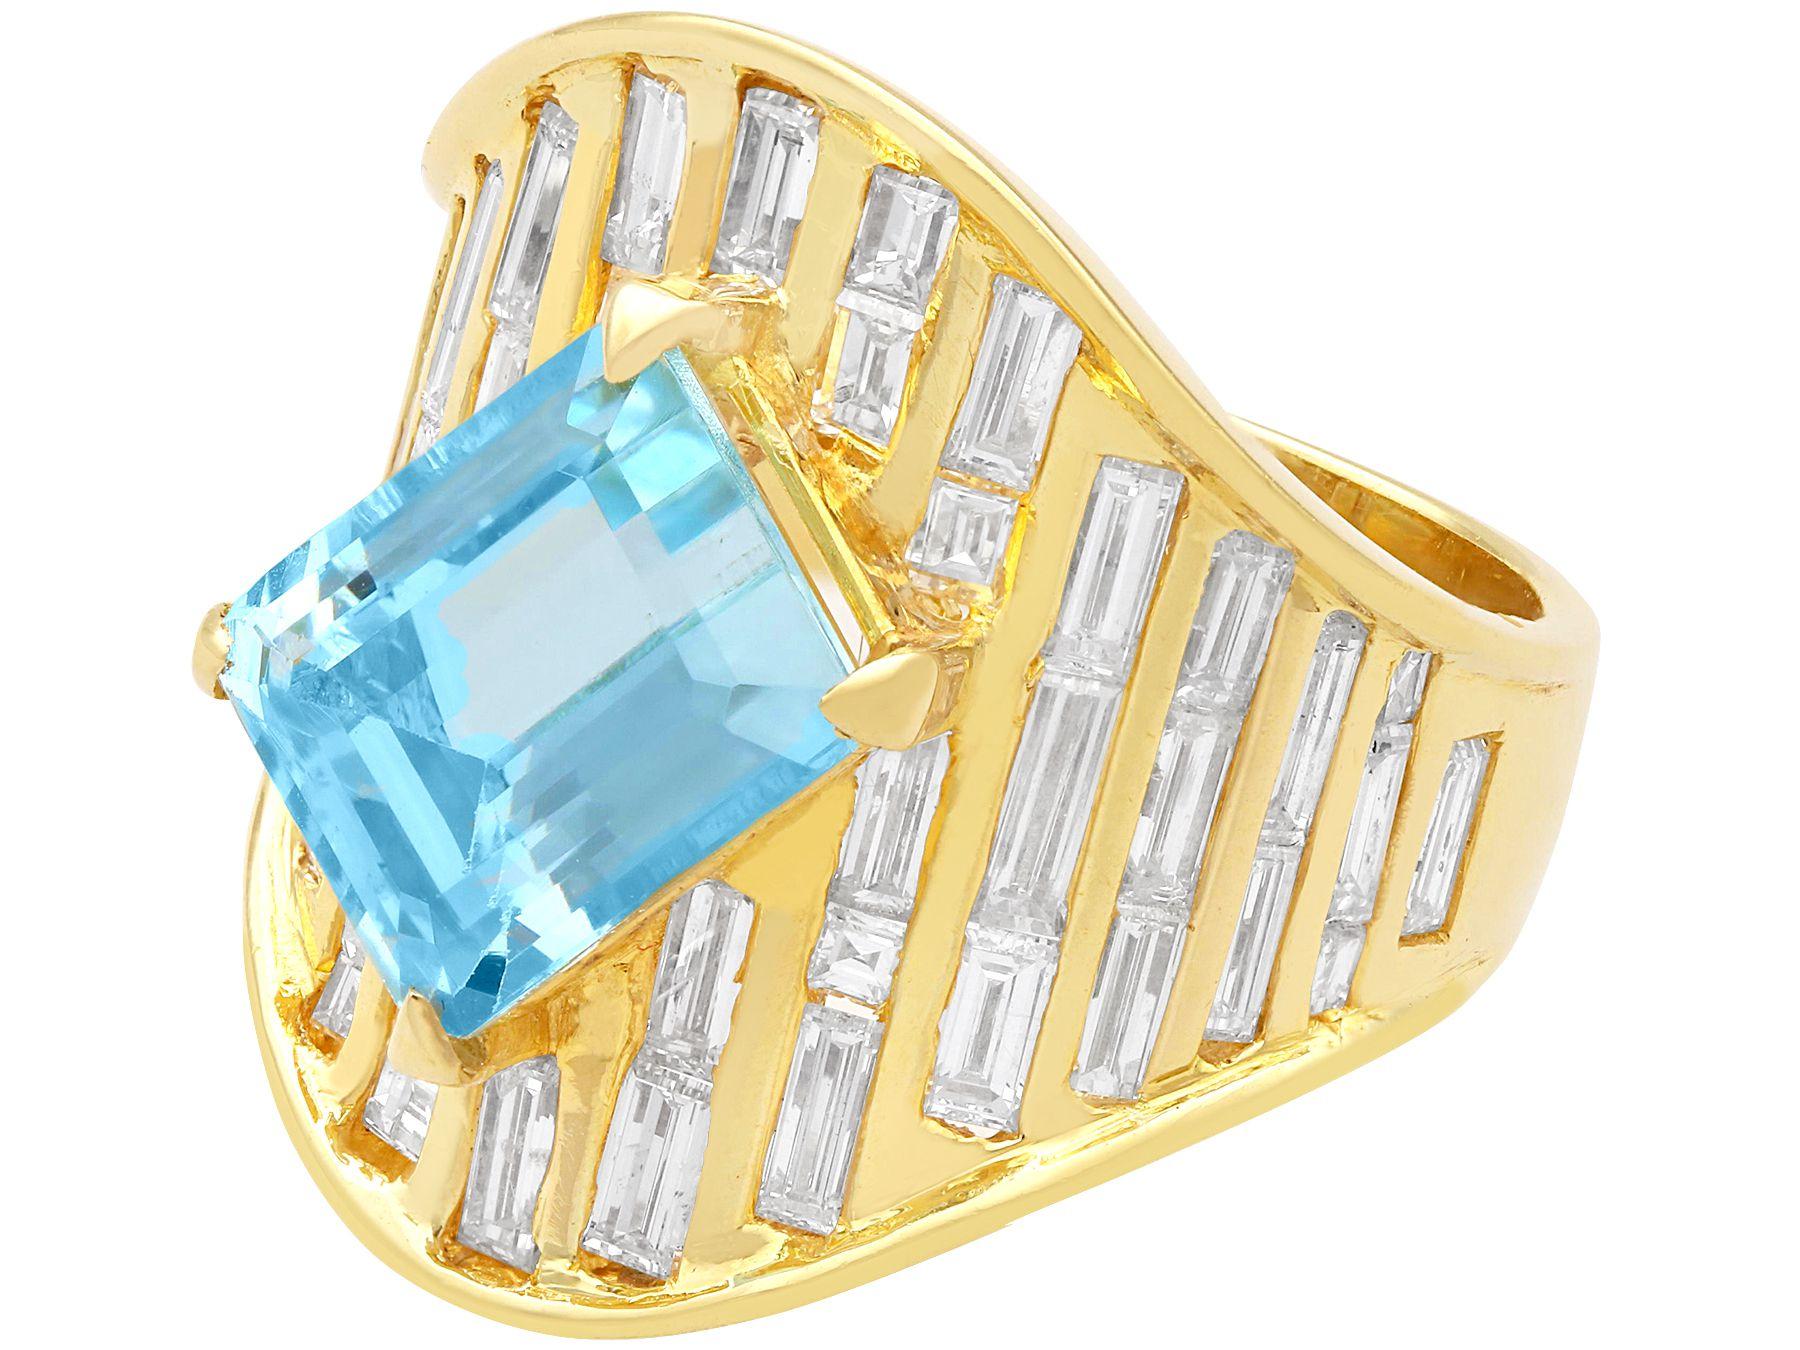 Contemporary 3.33 Carat Aquamarine and 1.55 Carat Diamond Yellow Gold Cocktail Ring For Sale